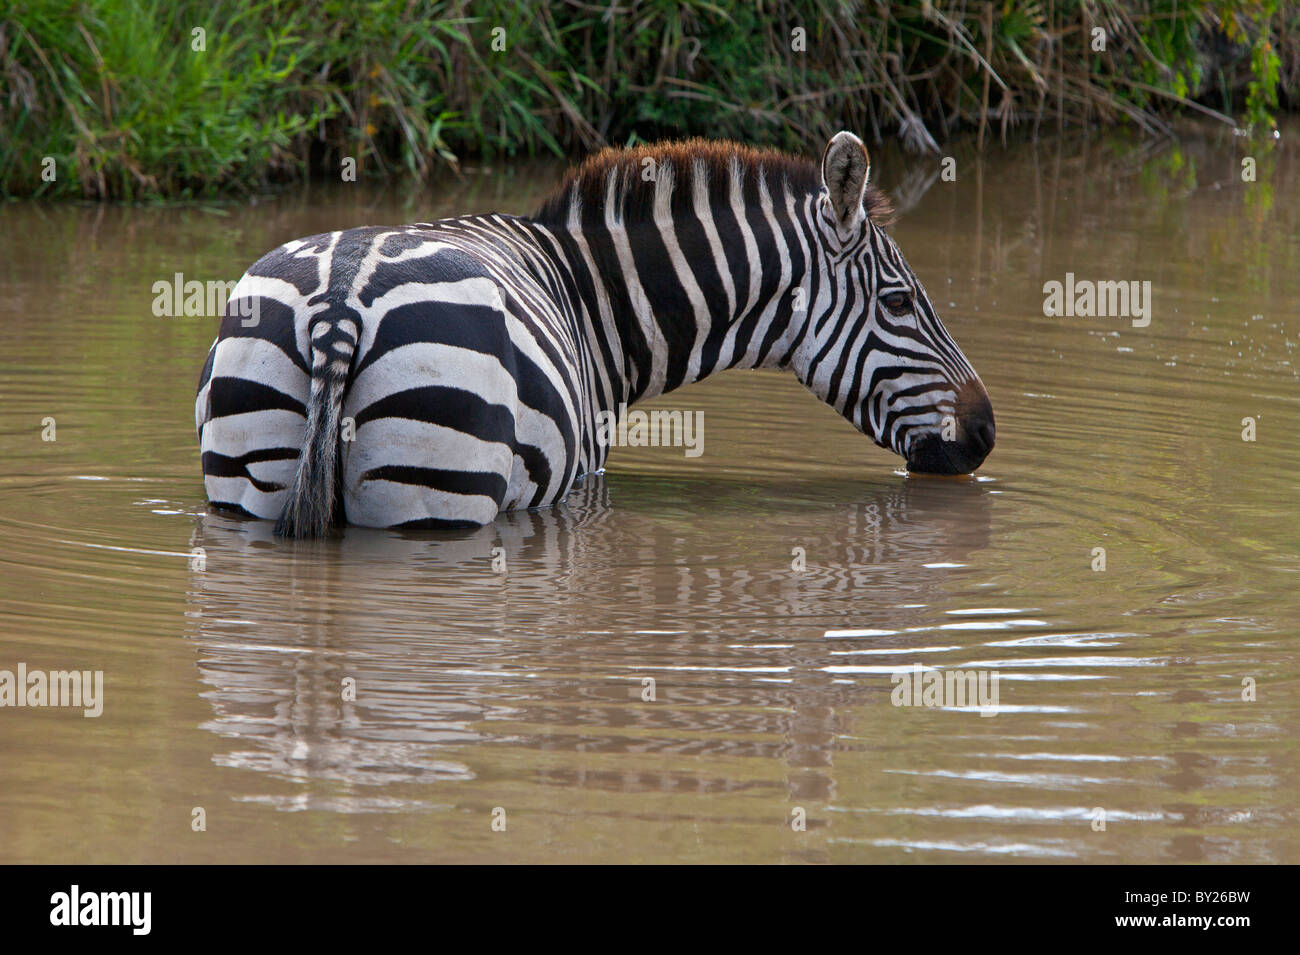 A common zebra wades into a muddy stream to drink in Masai-Mara National Reserve. Stock Photo